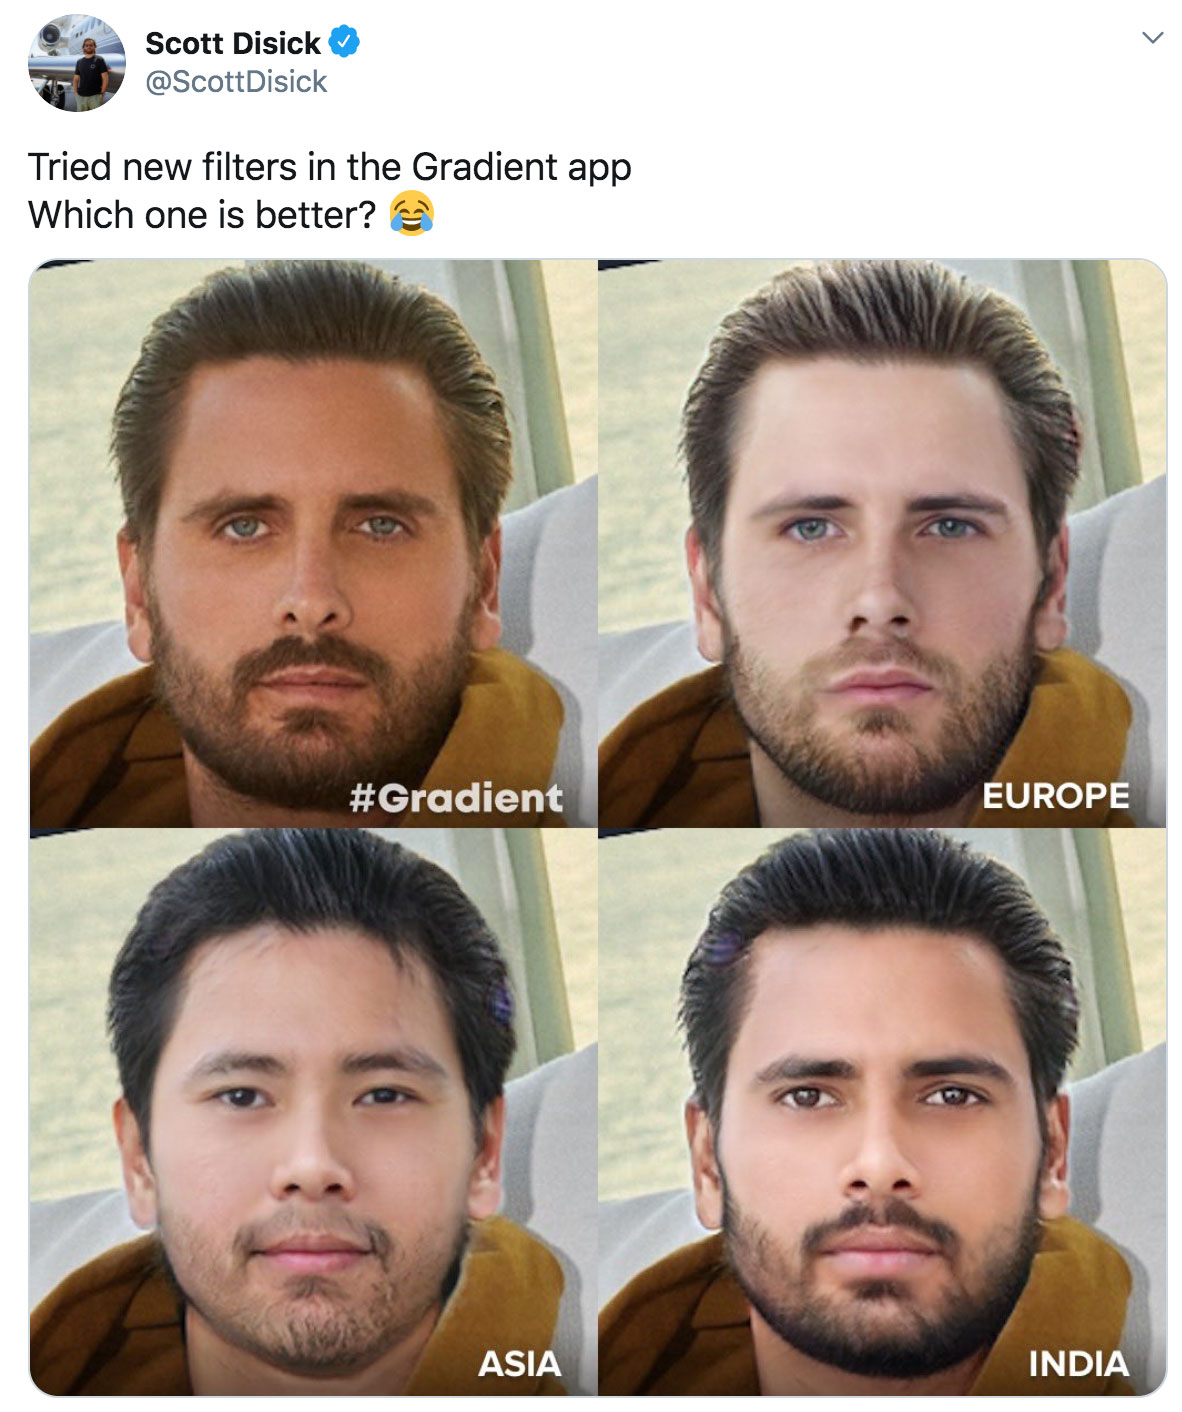 beard - Scott Disick Disick Tried new filters in the Gradient app Which one is better? Europe Asia India